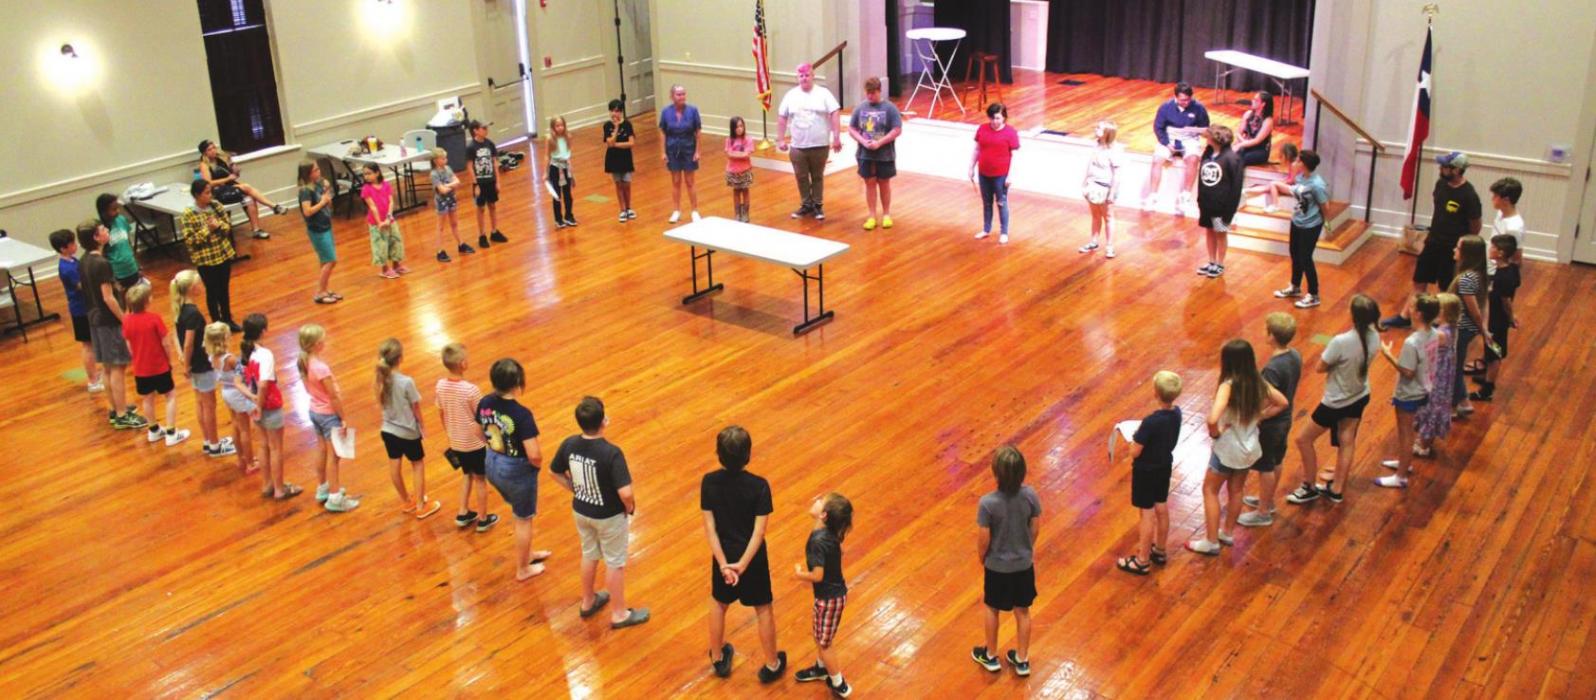 Student actors and crew warm-up prior to the start of rehearsals Thursday at the Casino Hall in La Grange for the upcoming all-student play “The Jungle Book” Aug. 13-15. Photos by Jeff Wick